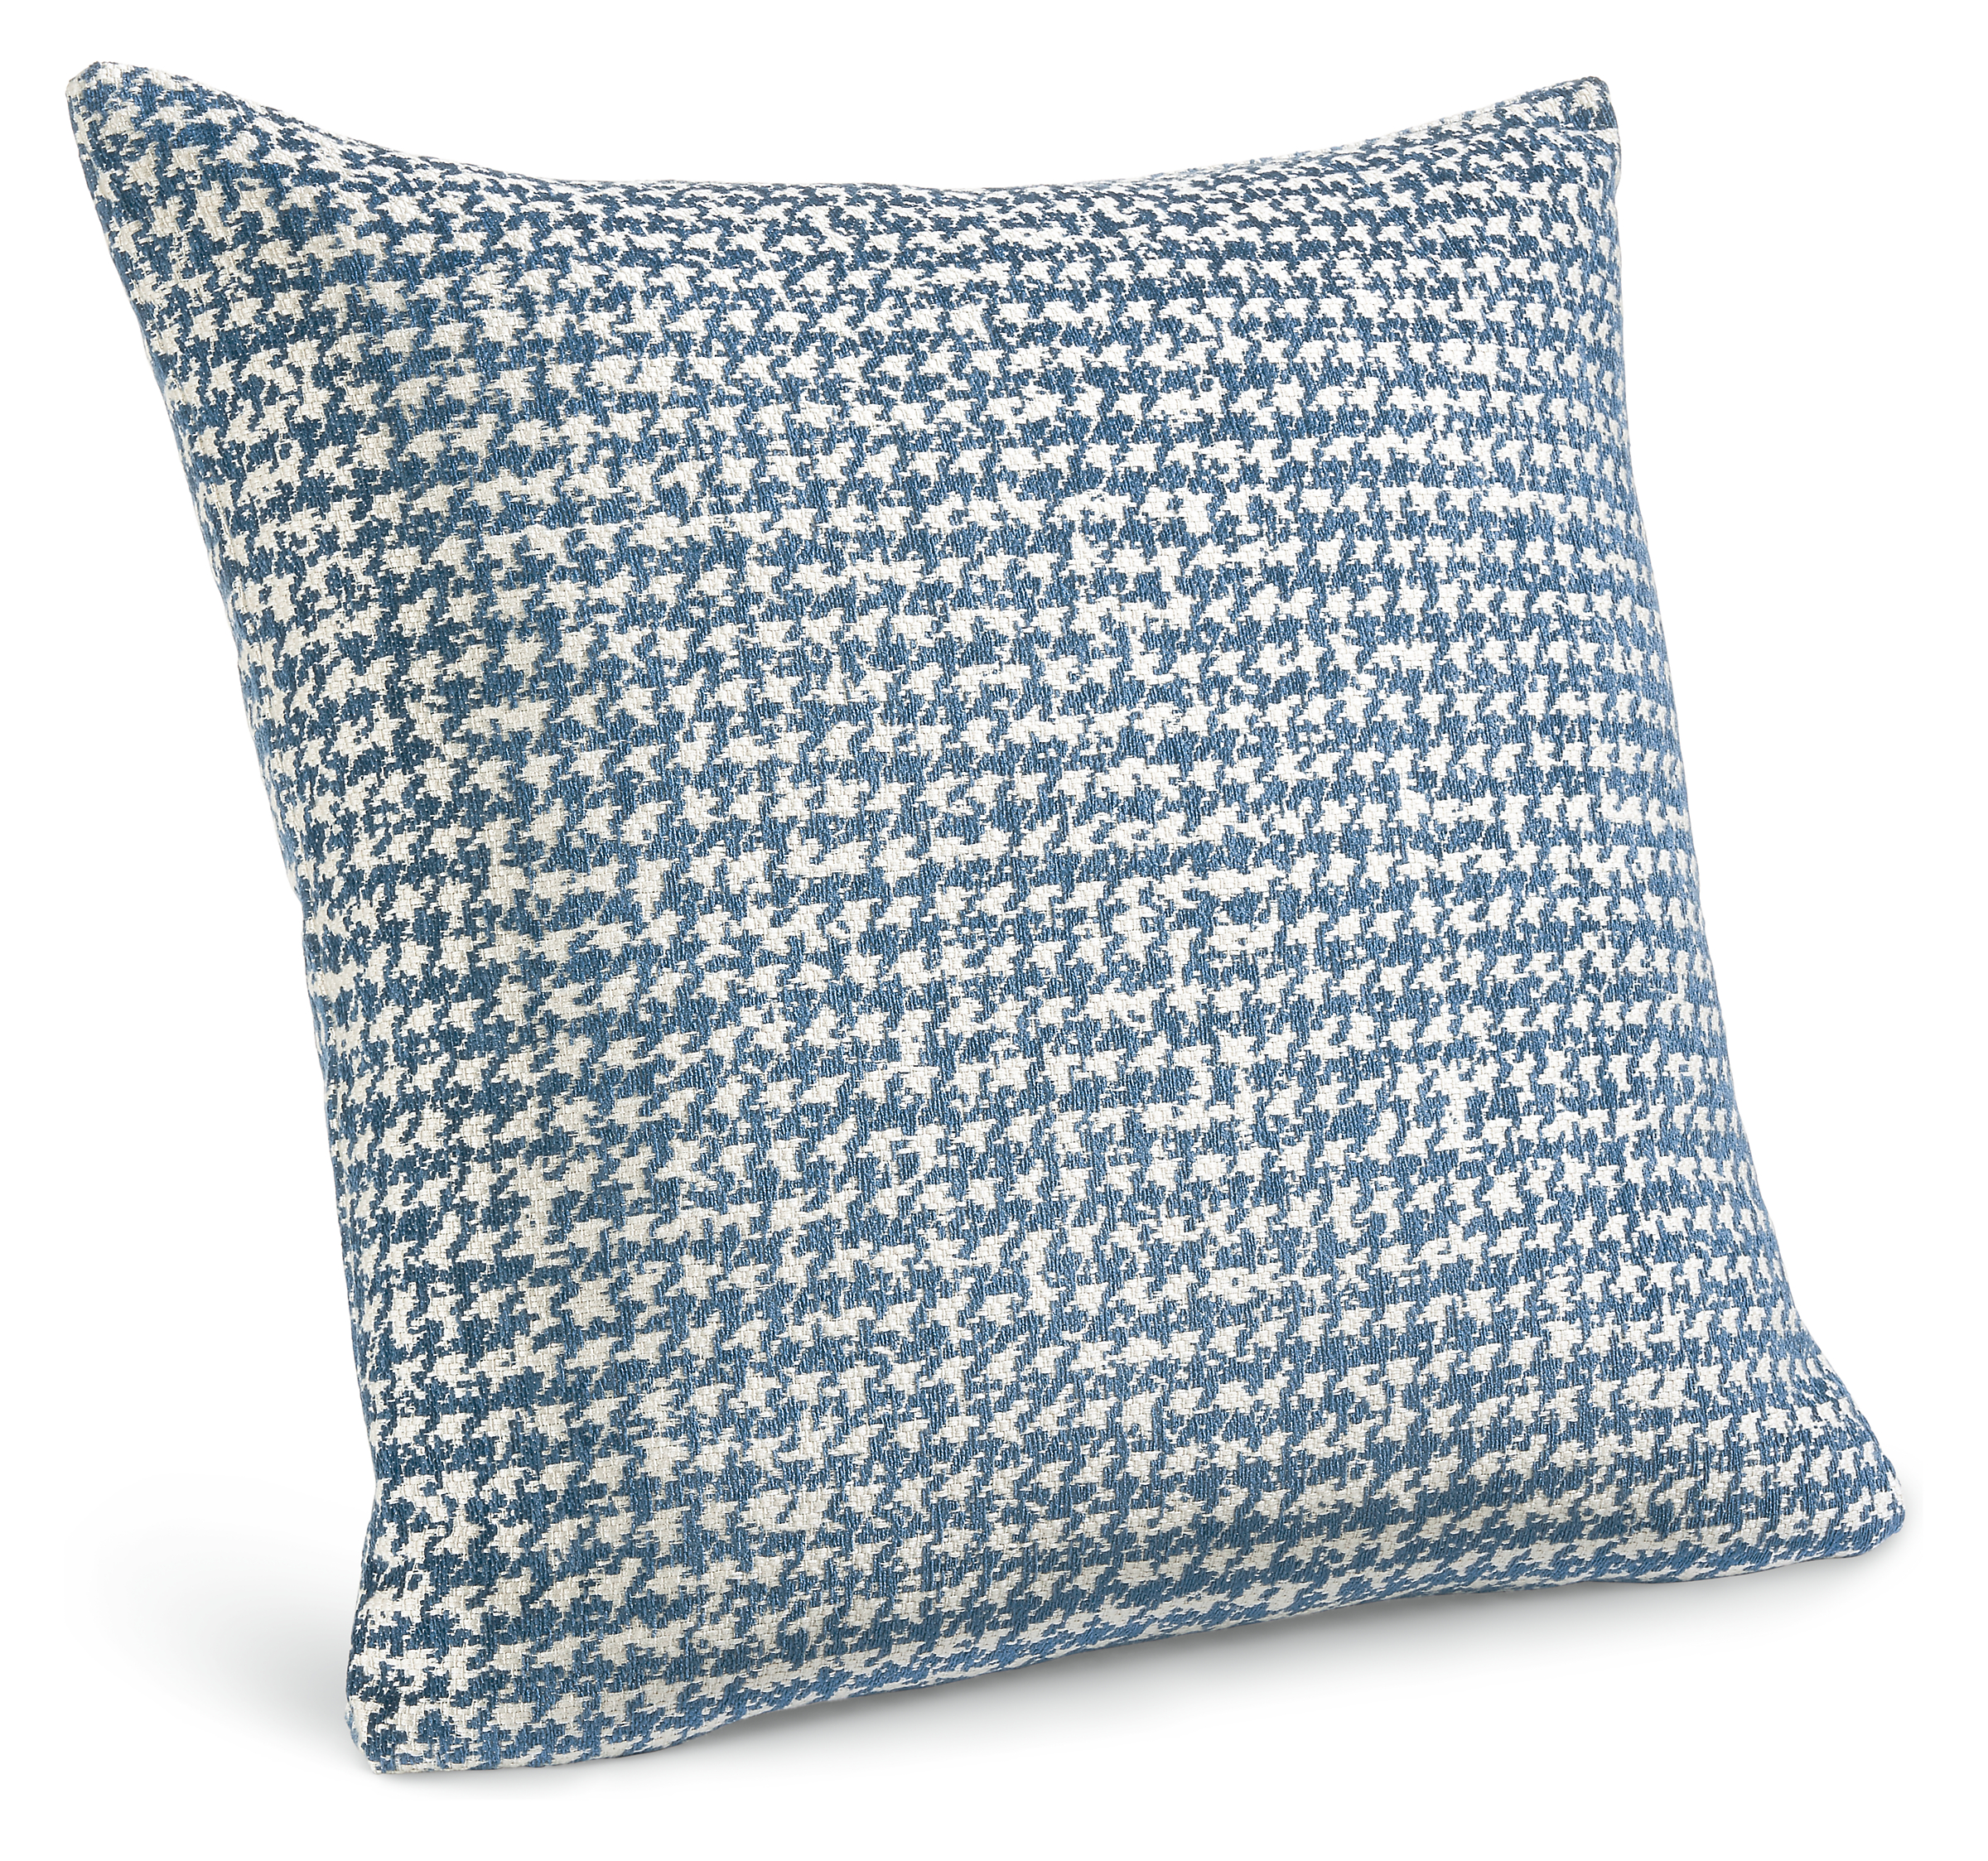 Barnes 24w 24h Throw Pillow Cover in Blue/White